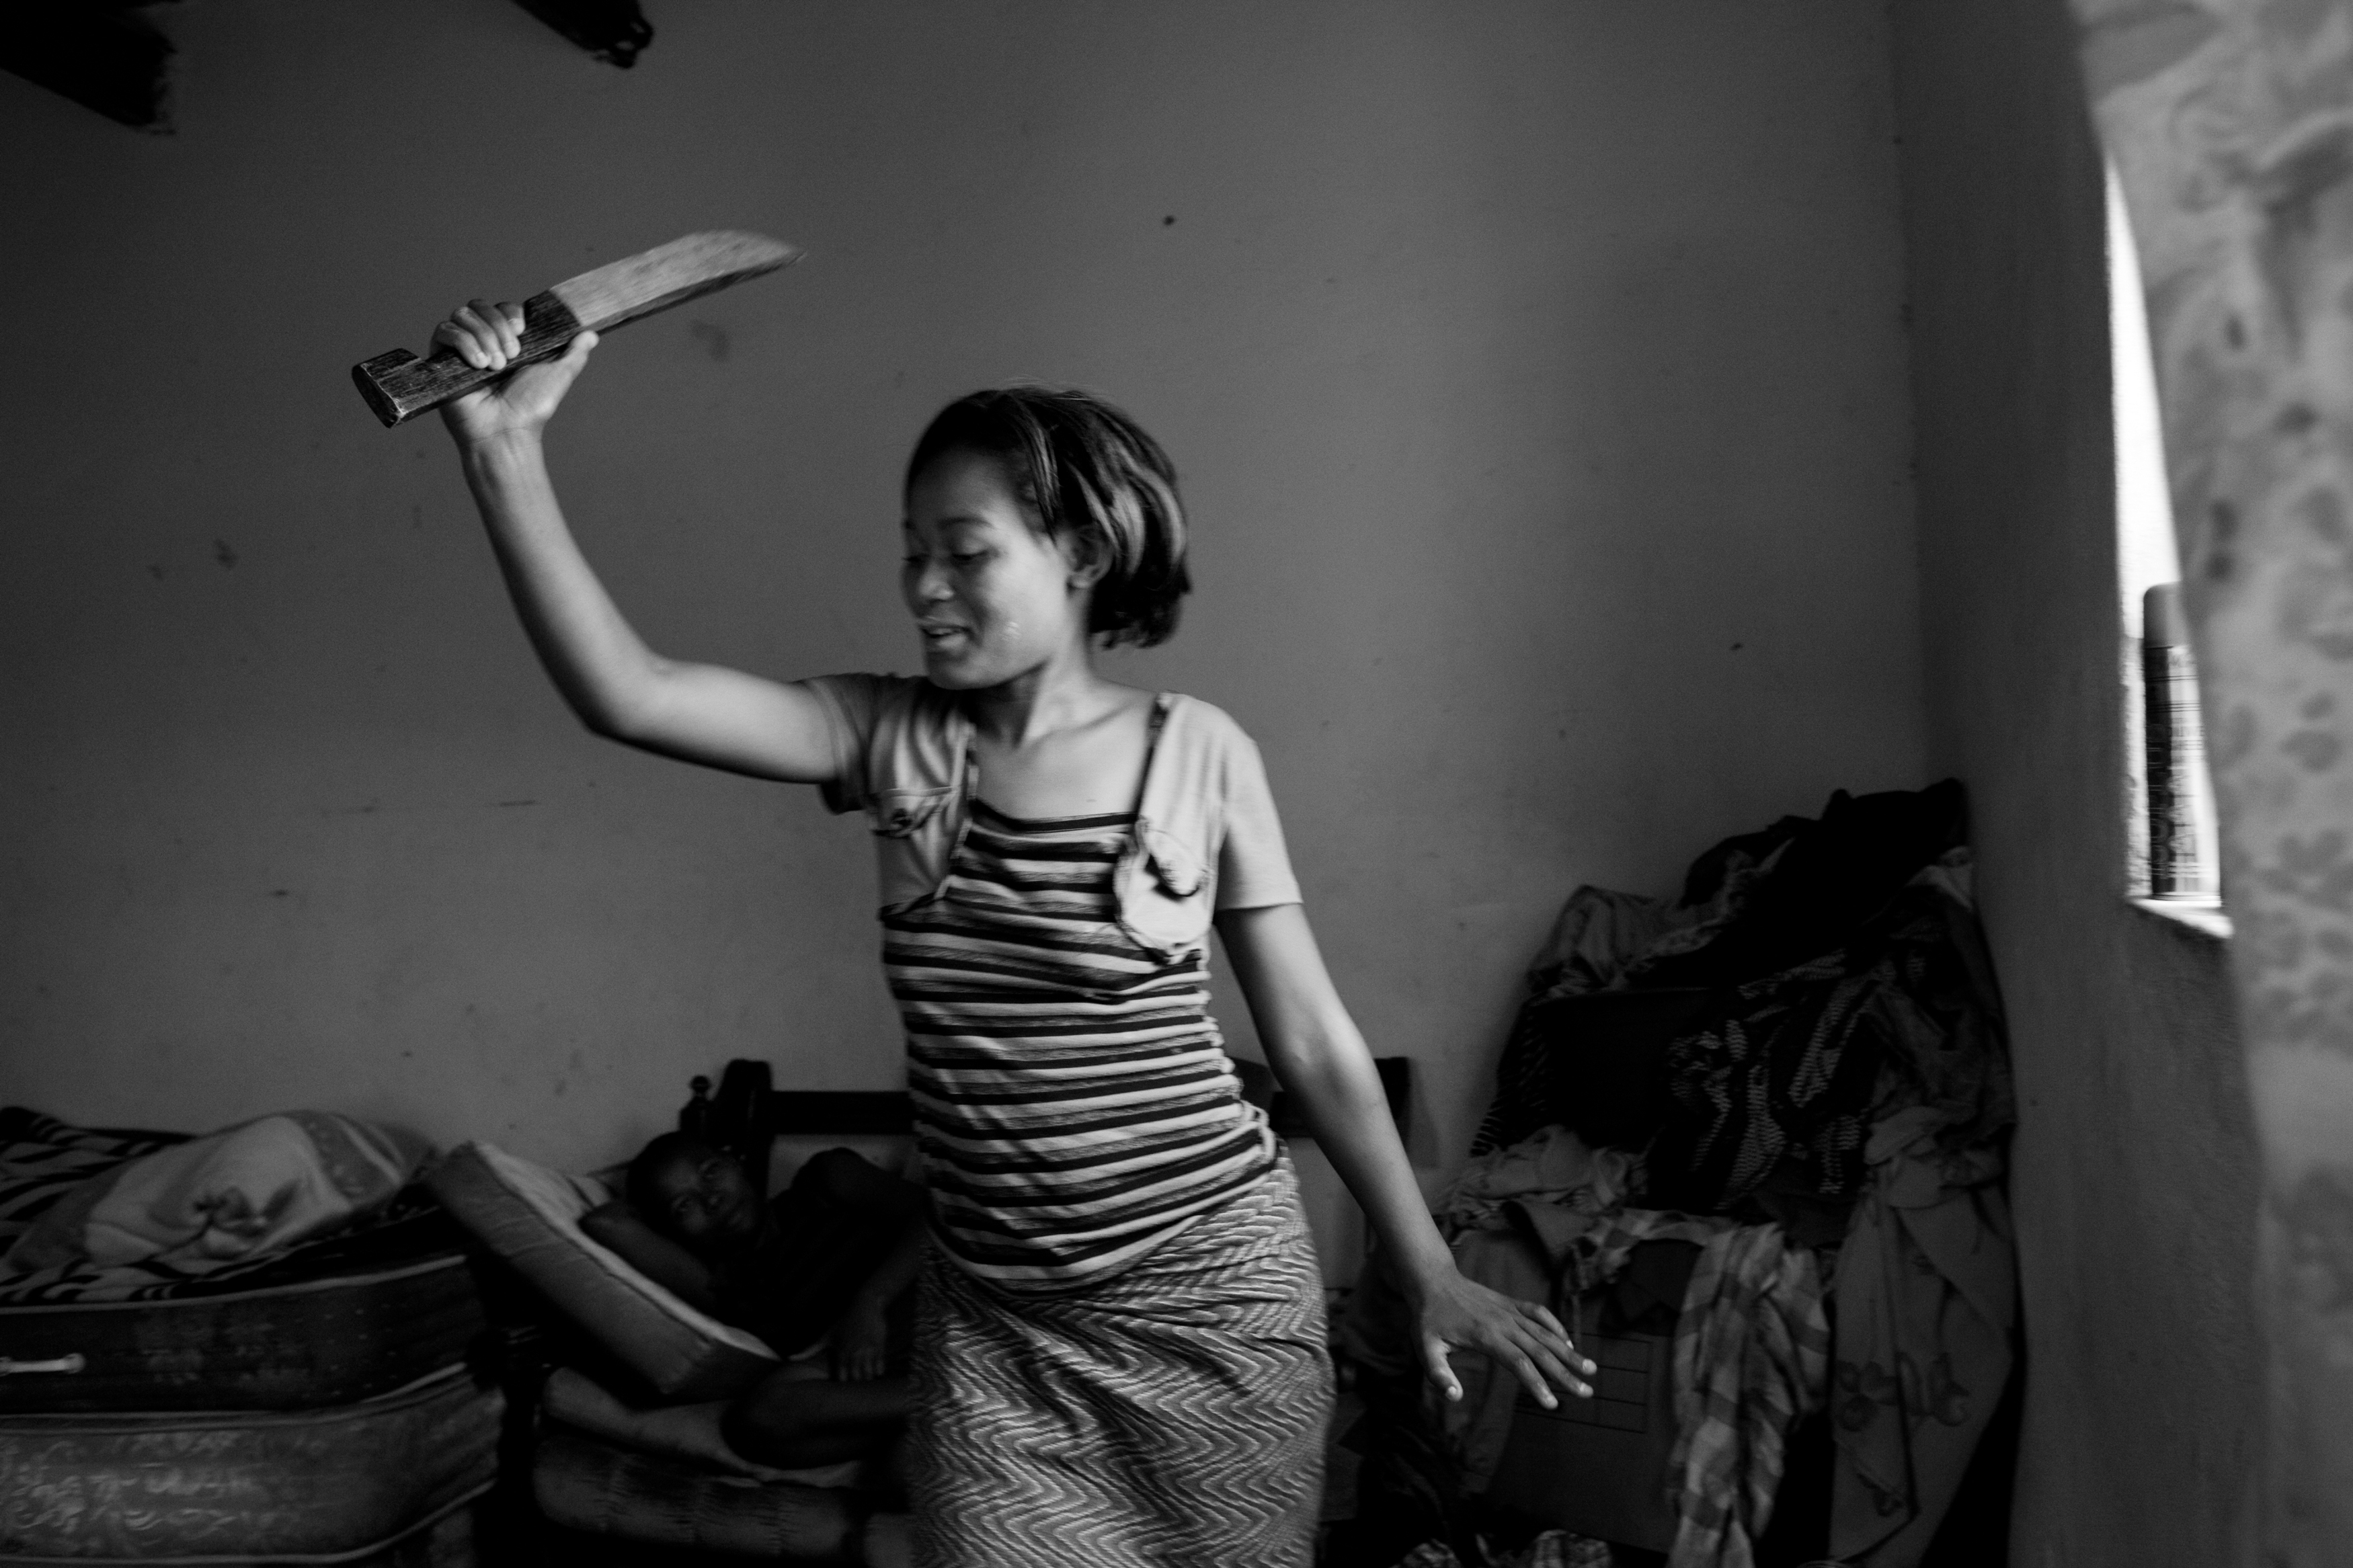 An HIV-positive woman, 20, dances in her room while visiting with friends. Since her young son died in September due to AIDS she has been depressed and drinking. She is scared to begin treatment due to stigma and fear.